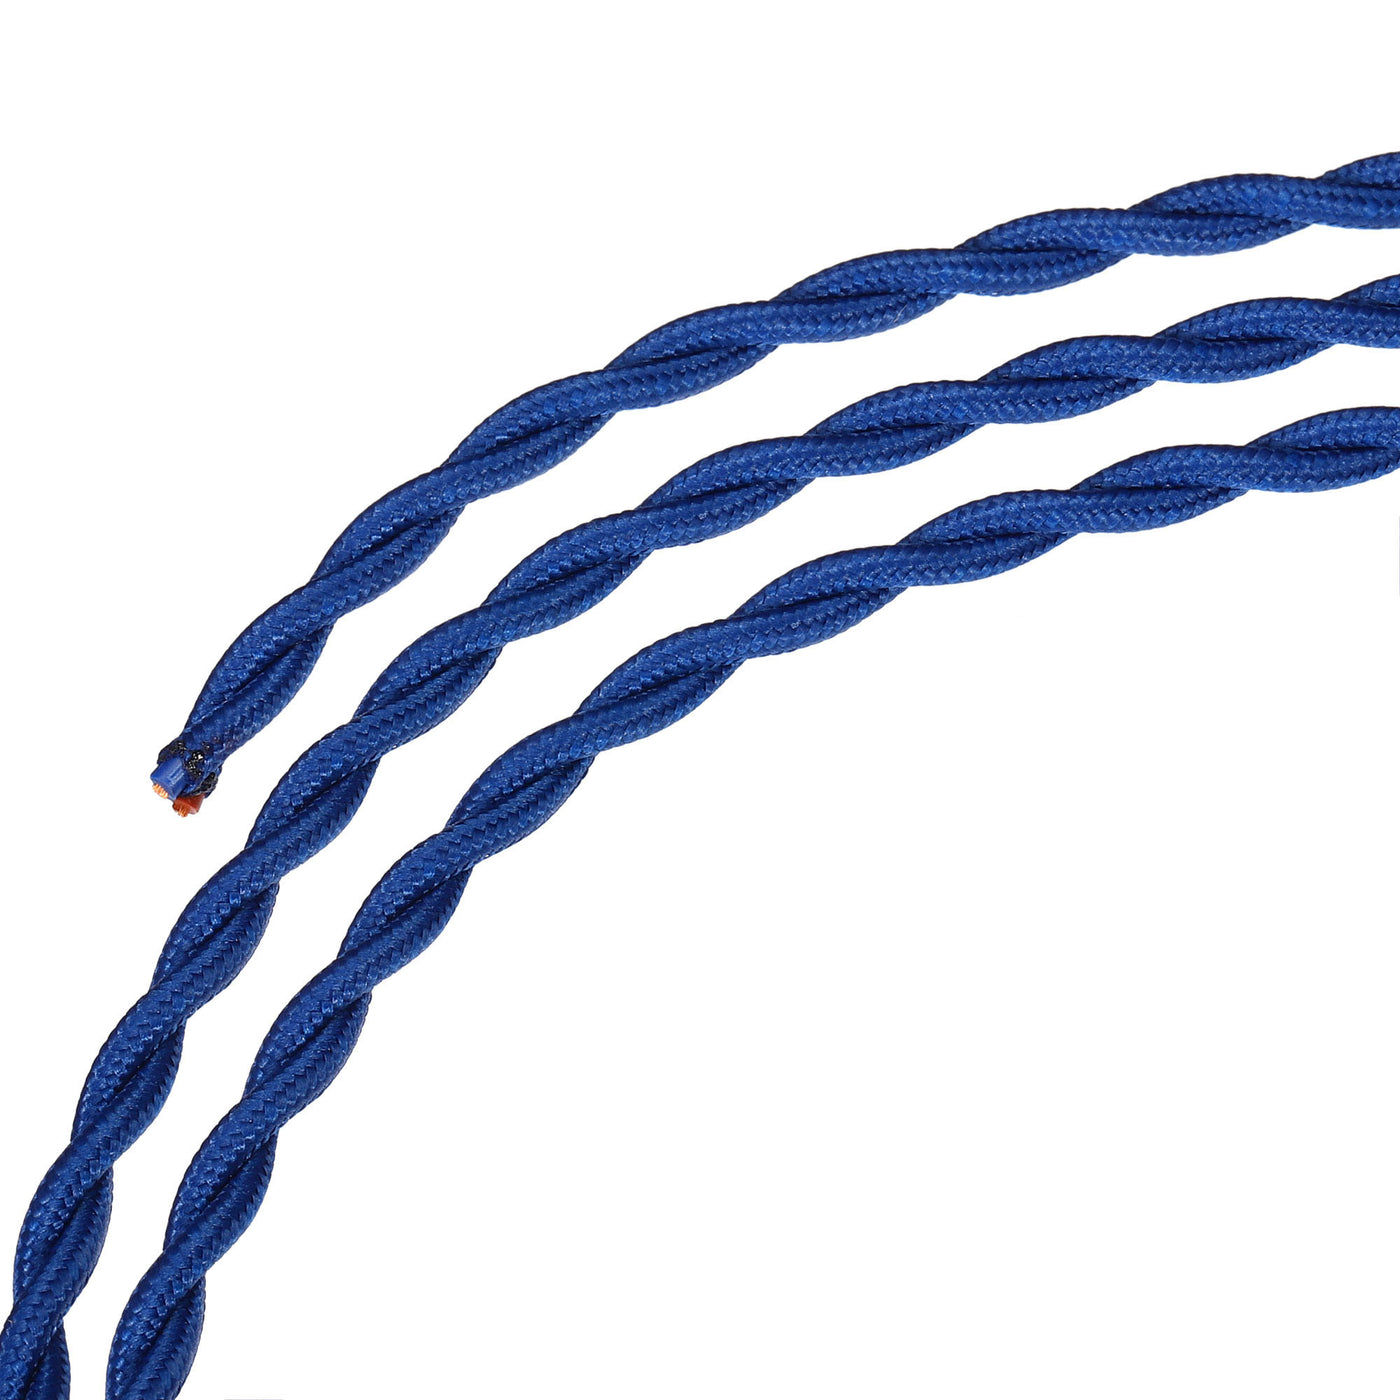 Harfington Twisted Cloth Covered Wire 2 Core 18AWG 10m/32.8ft,Electrical Cable,Blue